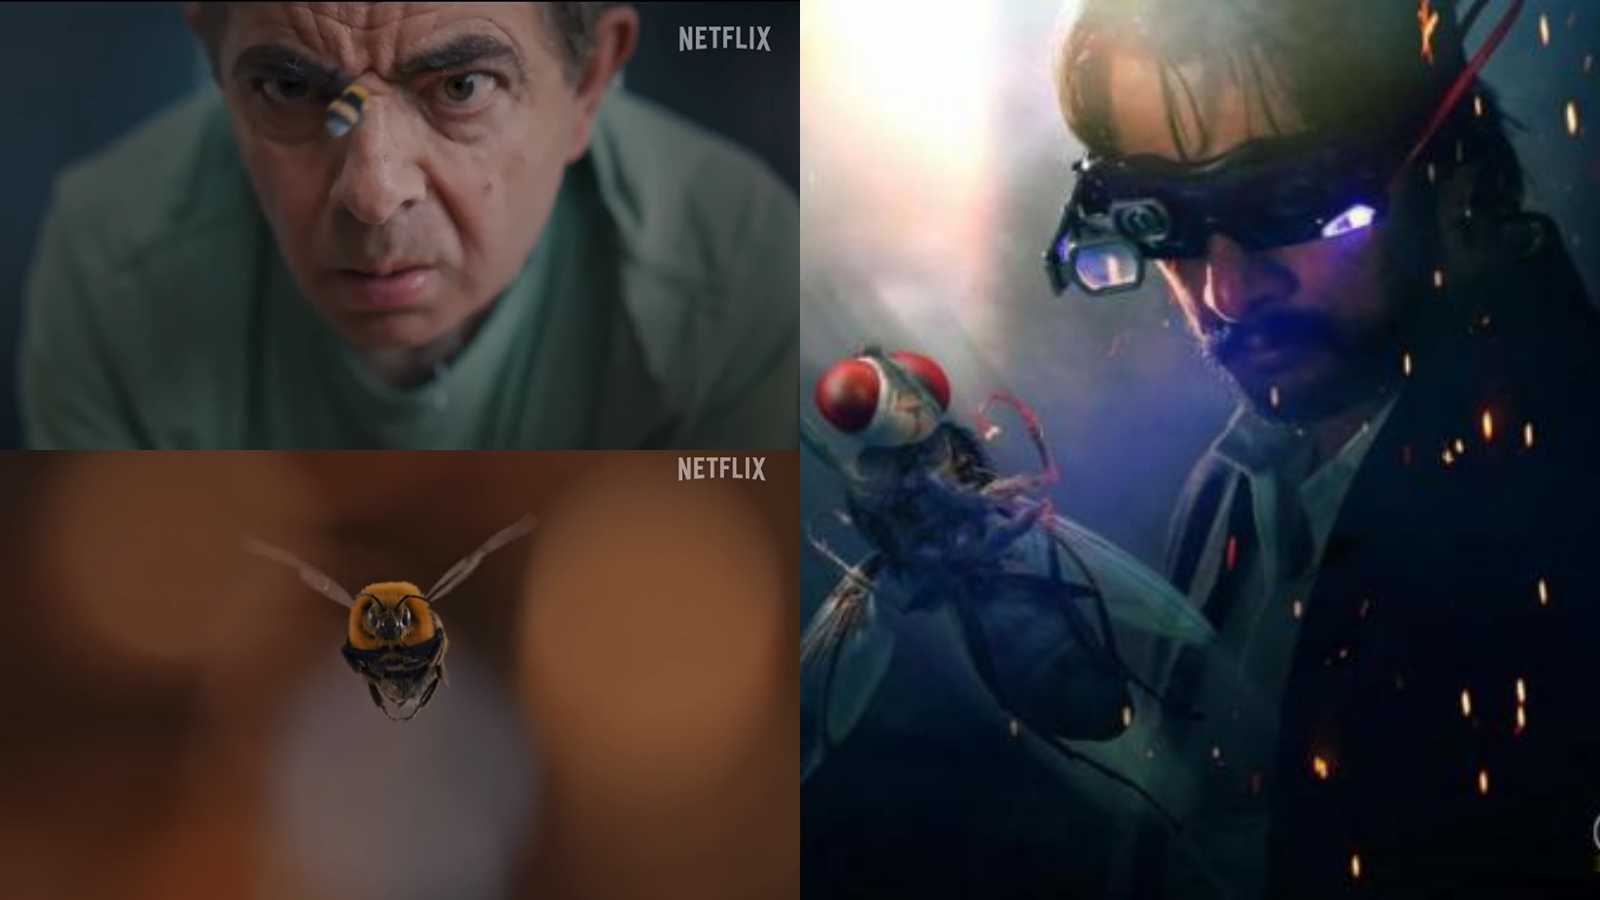 Man Vs Bee trailer: It is Rowan Atkinson against a bee in this Netflix  comedy, Indian fans call it Rajamouli's Eega 'freemake'